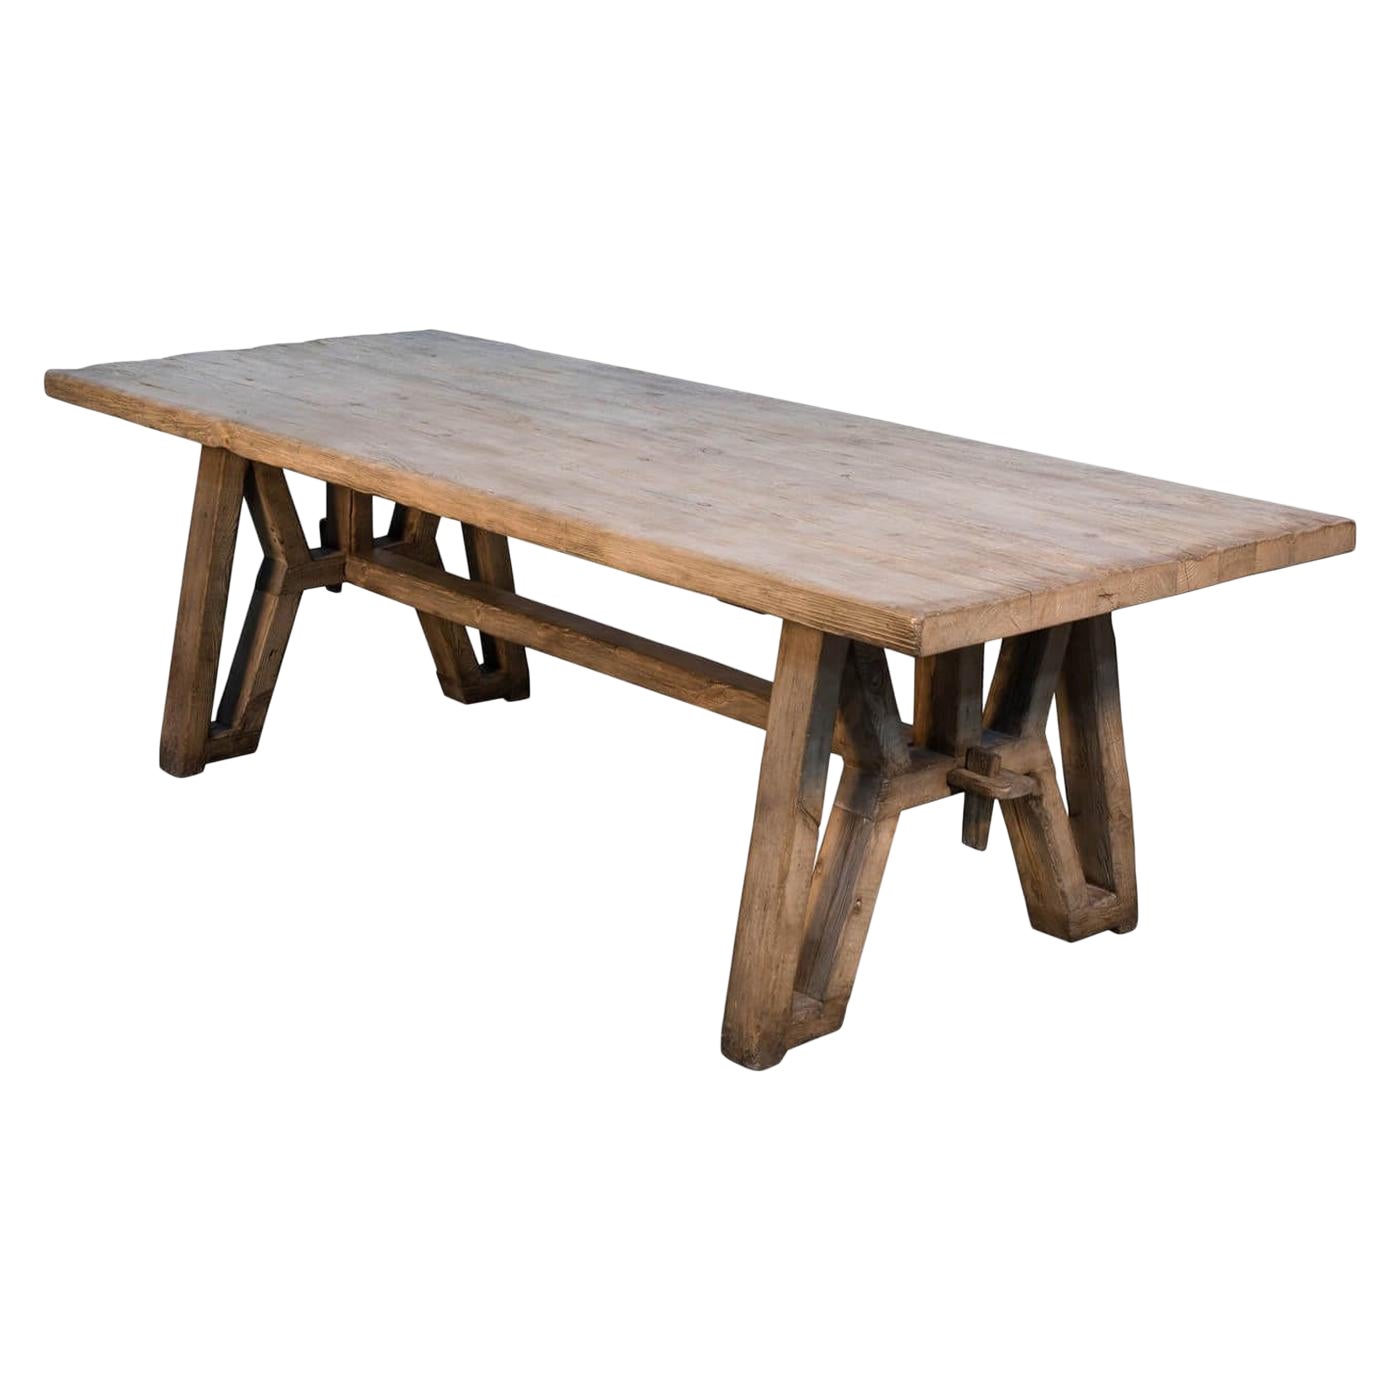 Harvest Wood Island kitchen Kitchen tables 1stDibs Industrial Sale wood at sale, industrial For Reclaimed industrial table, Table Great for | tables